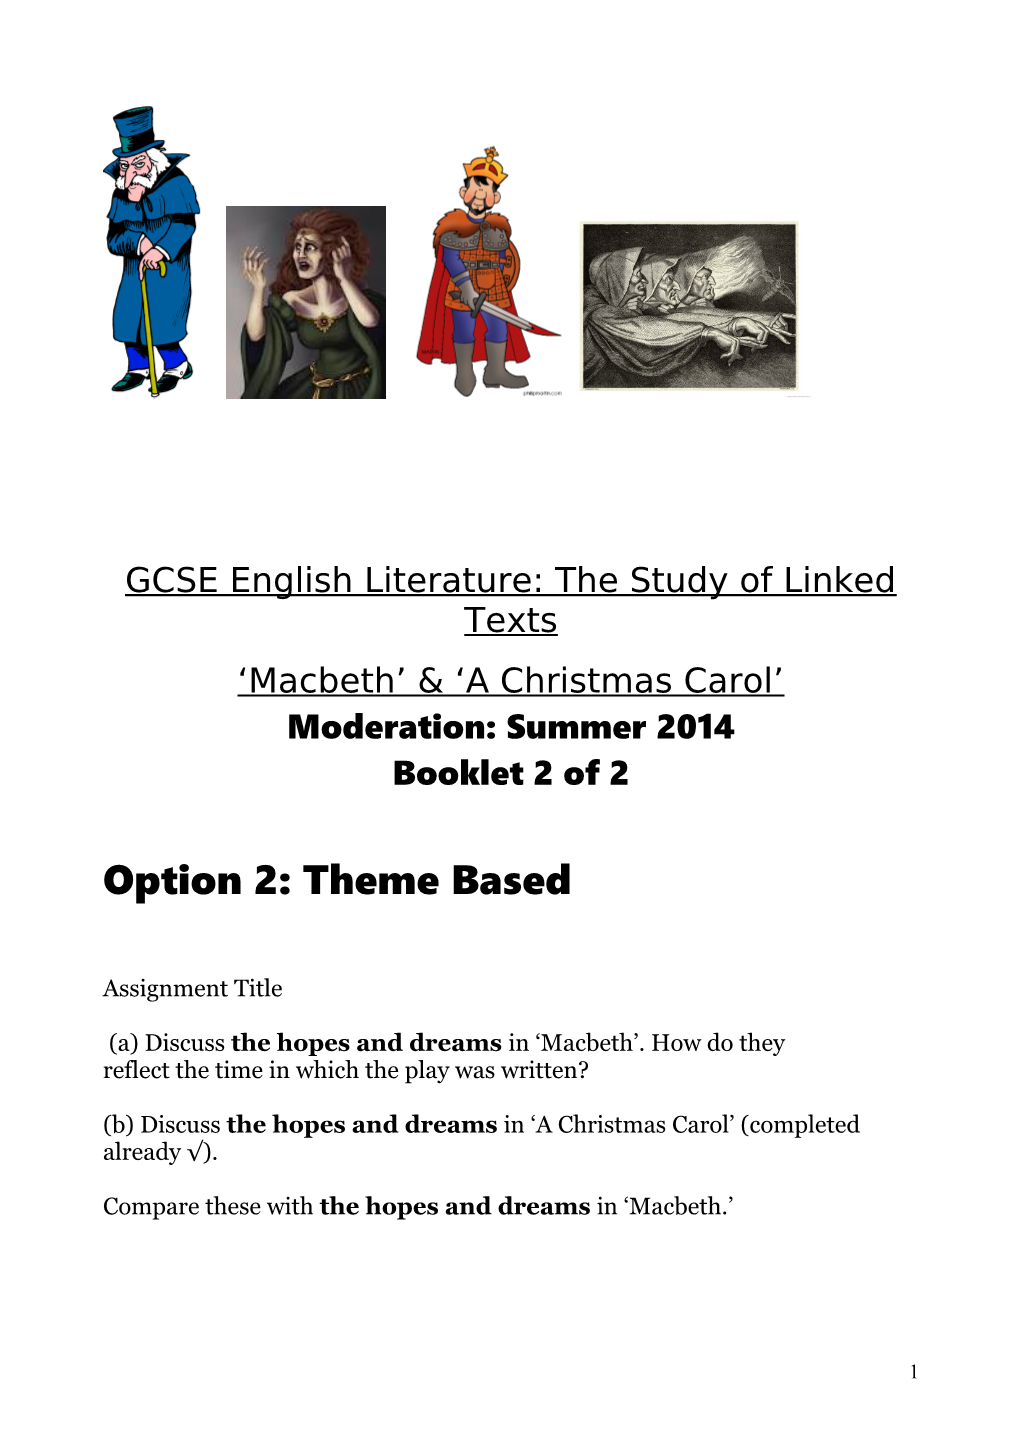 GCSE English Literature: the Study of Linked Texts